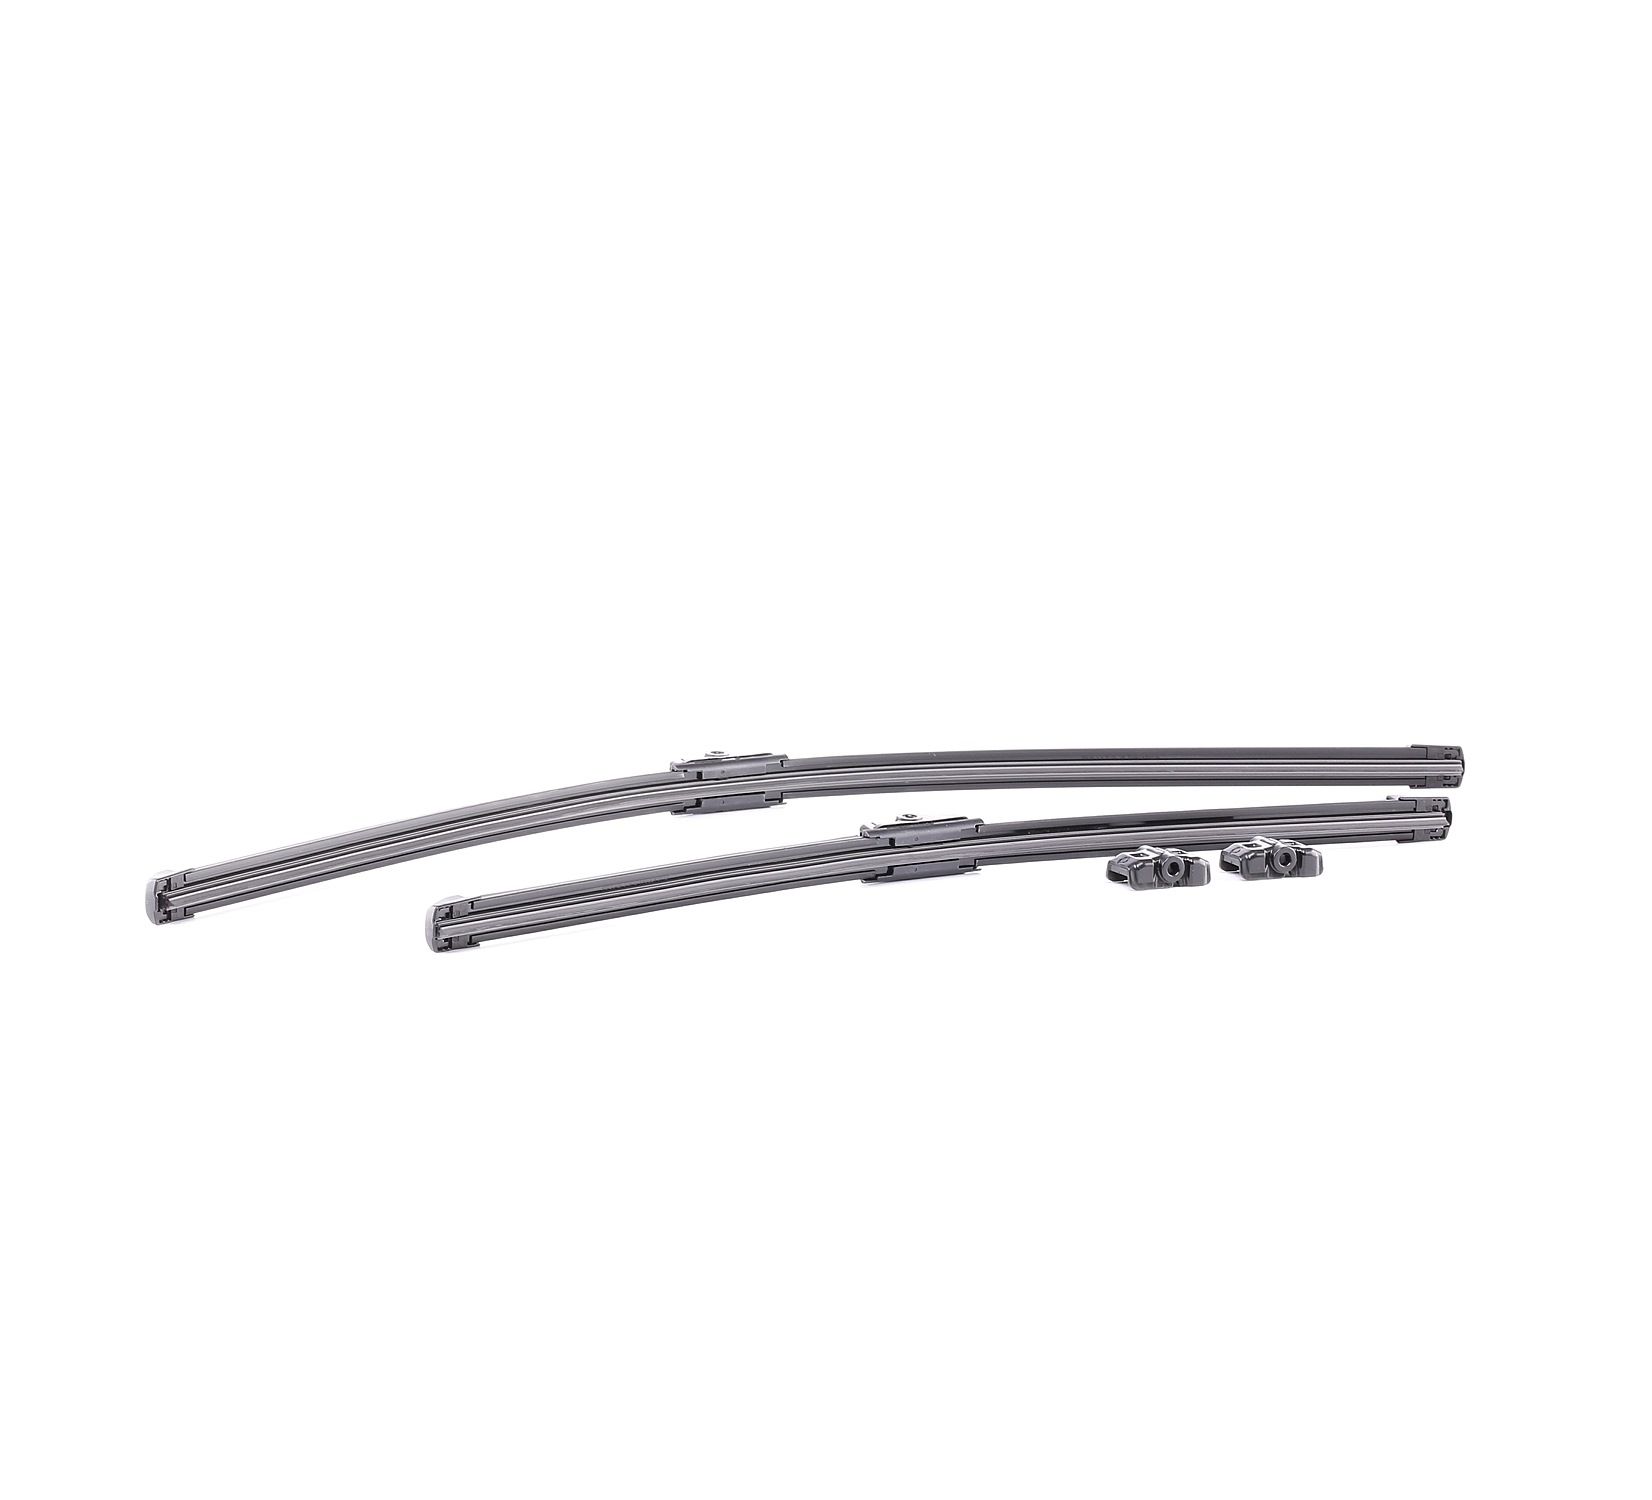 Planet Feasibility Forkert AFL6548E/C02 CHAMPION Aerovantage Flat Wiper Blade 650/480mm, 26/19 Inch,  Beam AFL6548E ▷ AUTODOC price and review